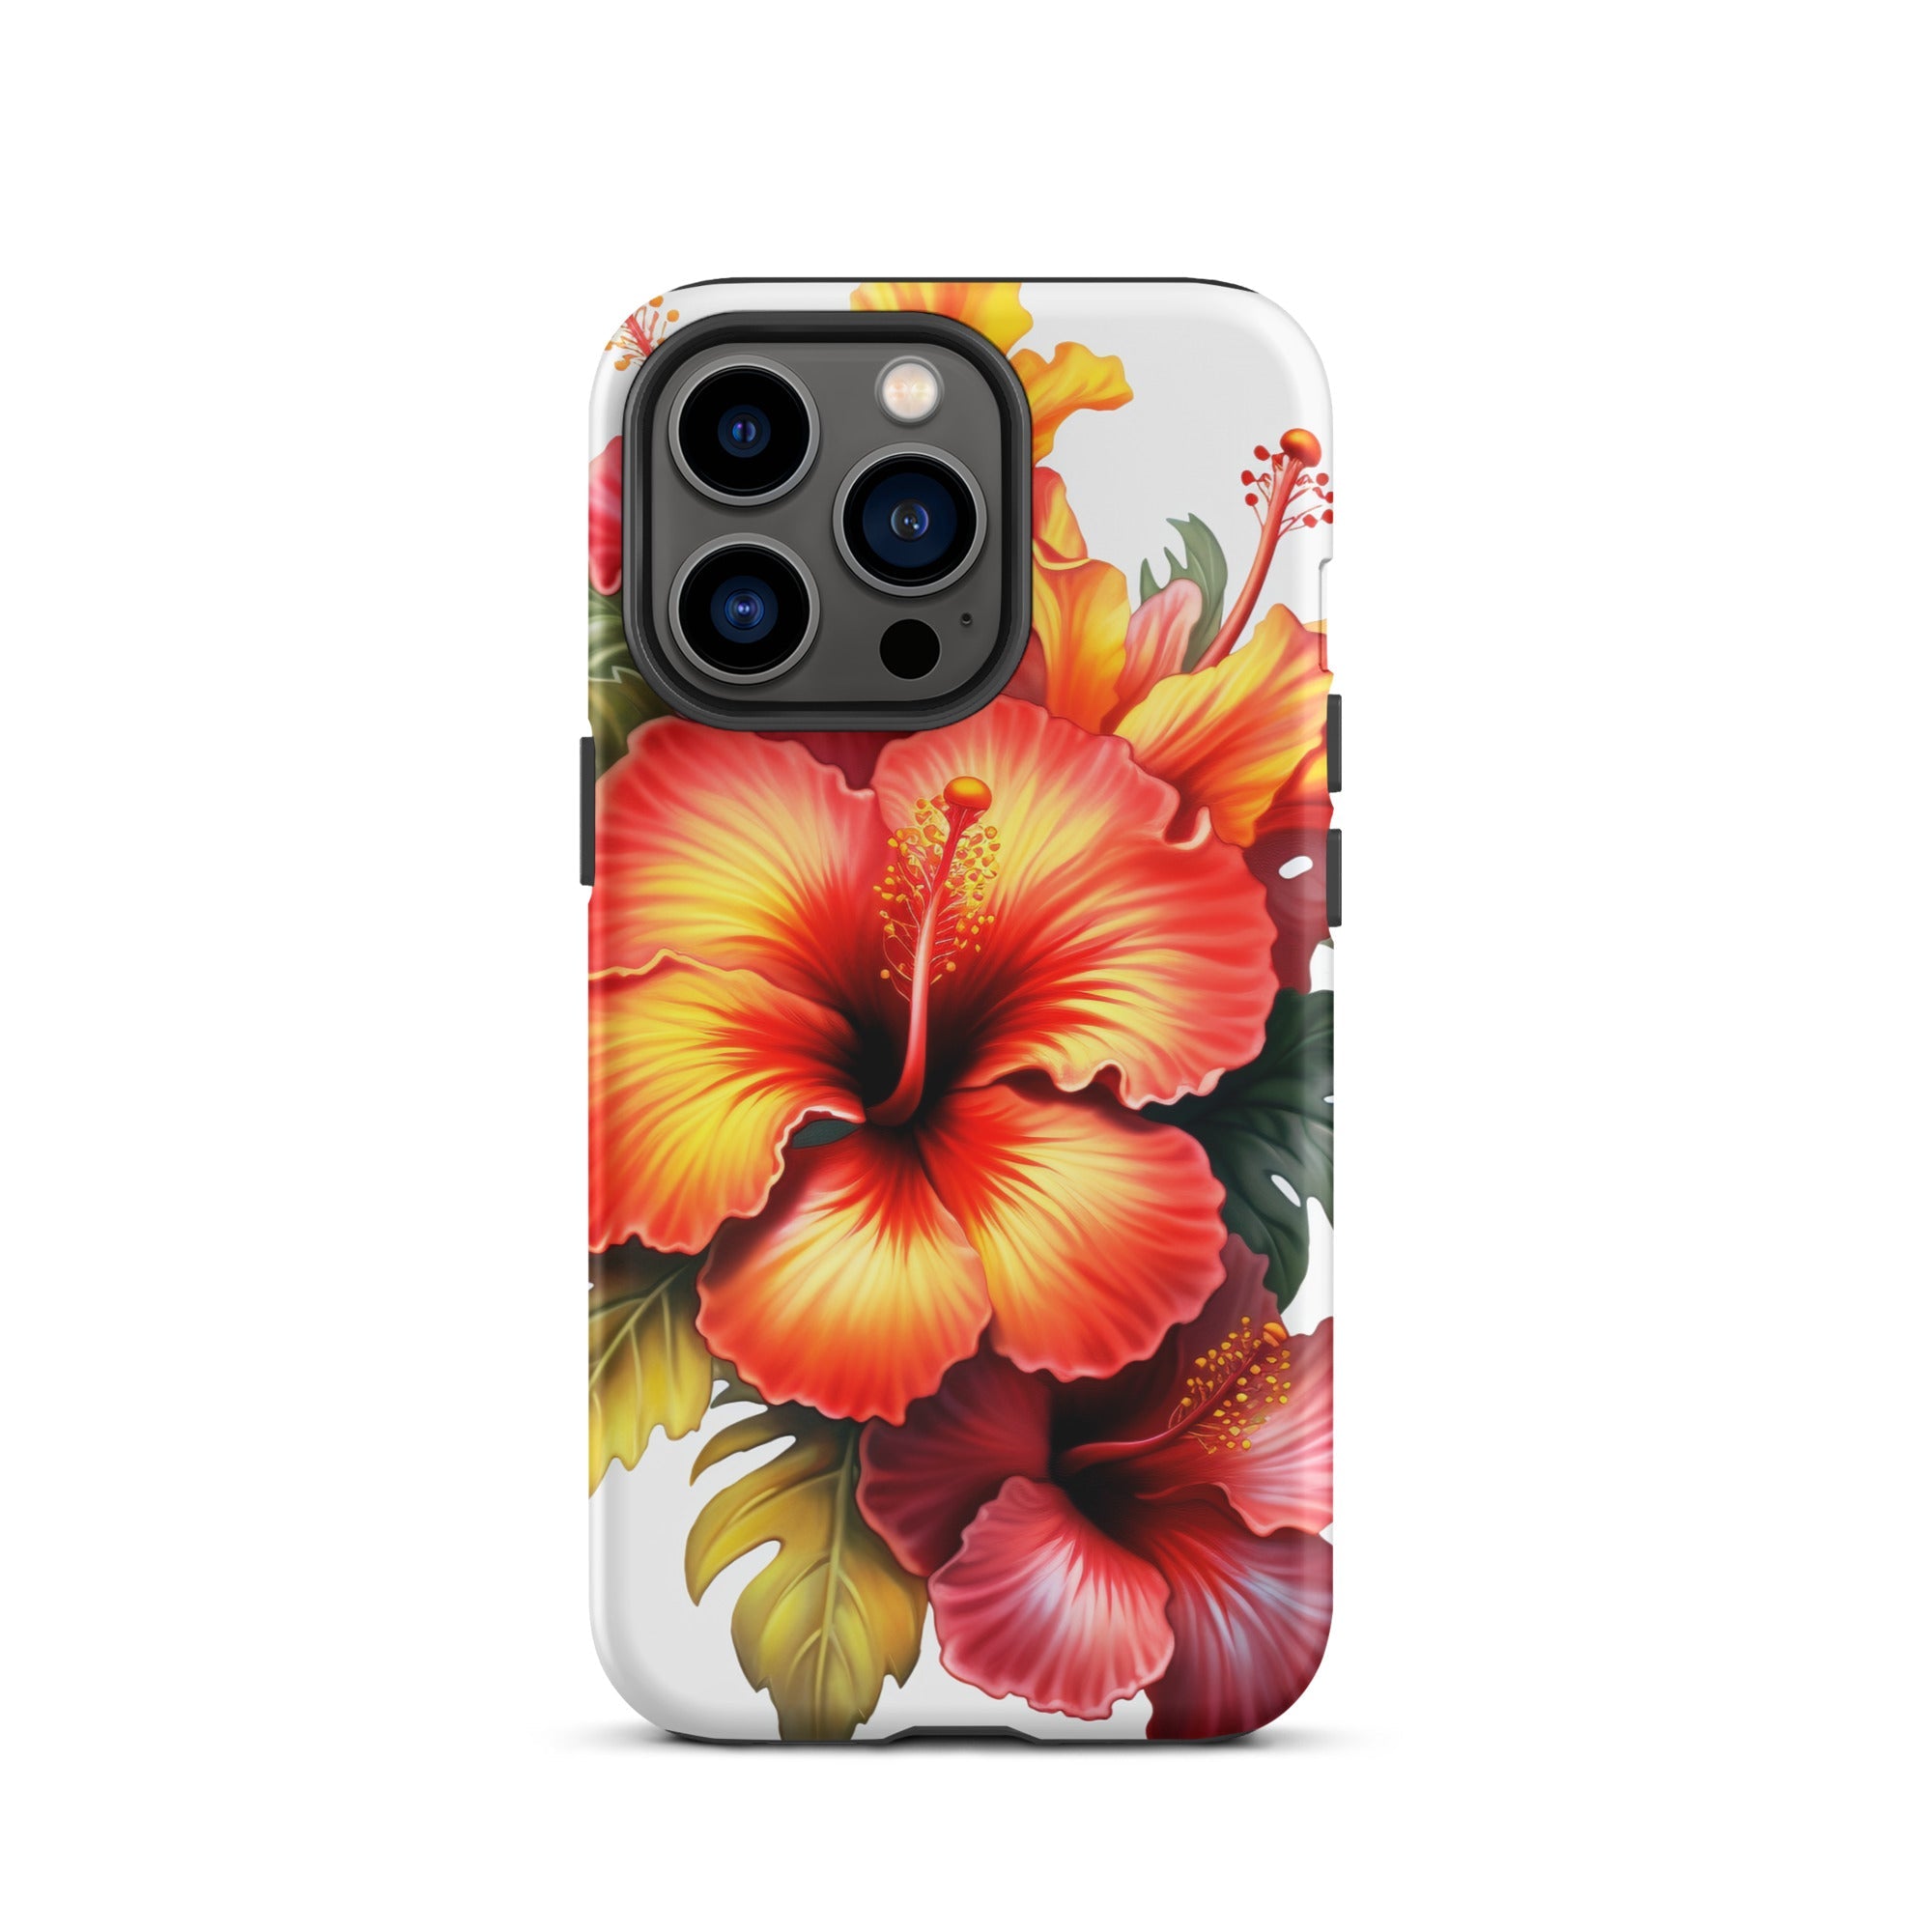 Hibiscus Flower iPhone Case by Visual Verse - Image 20